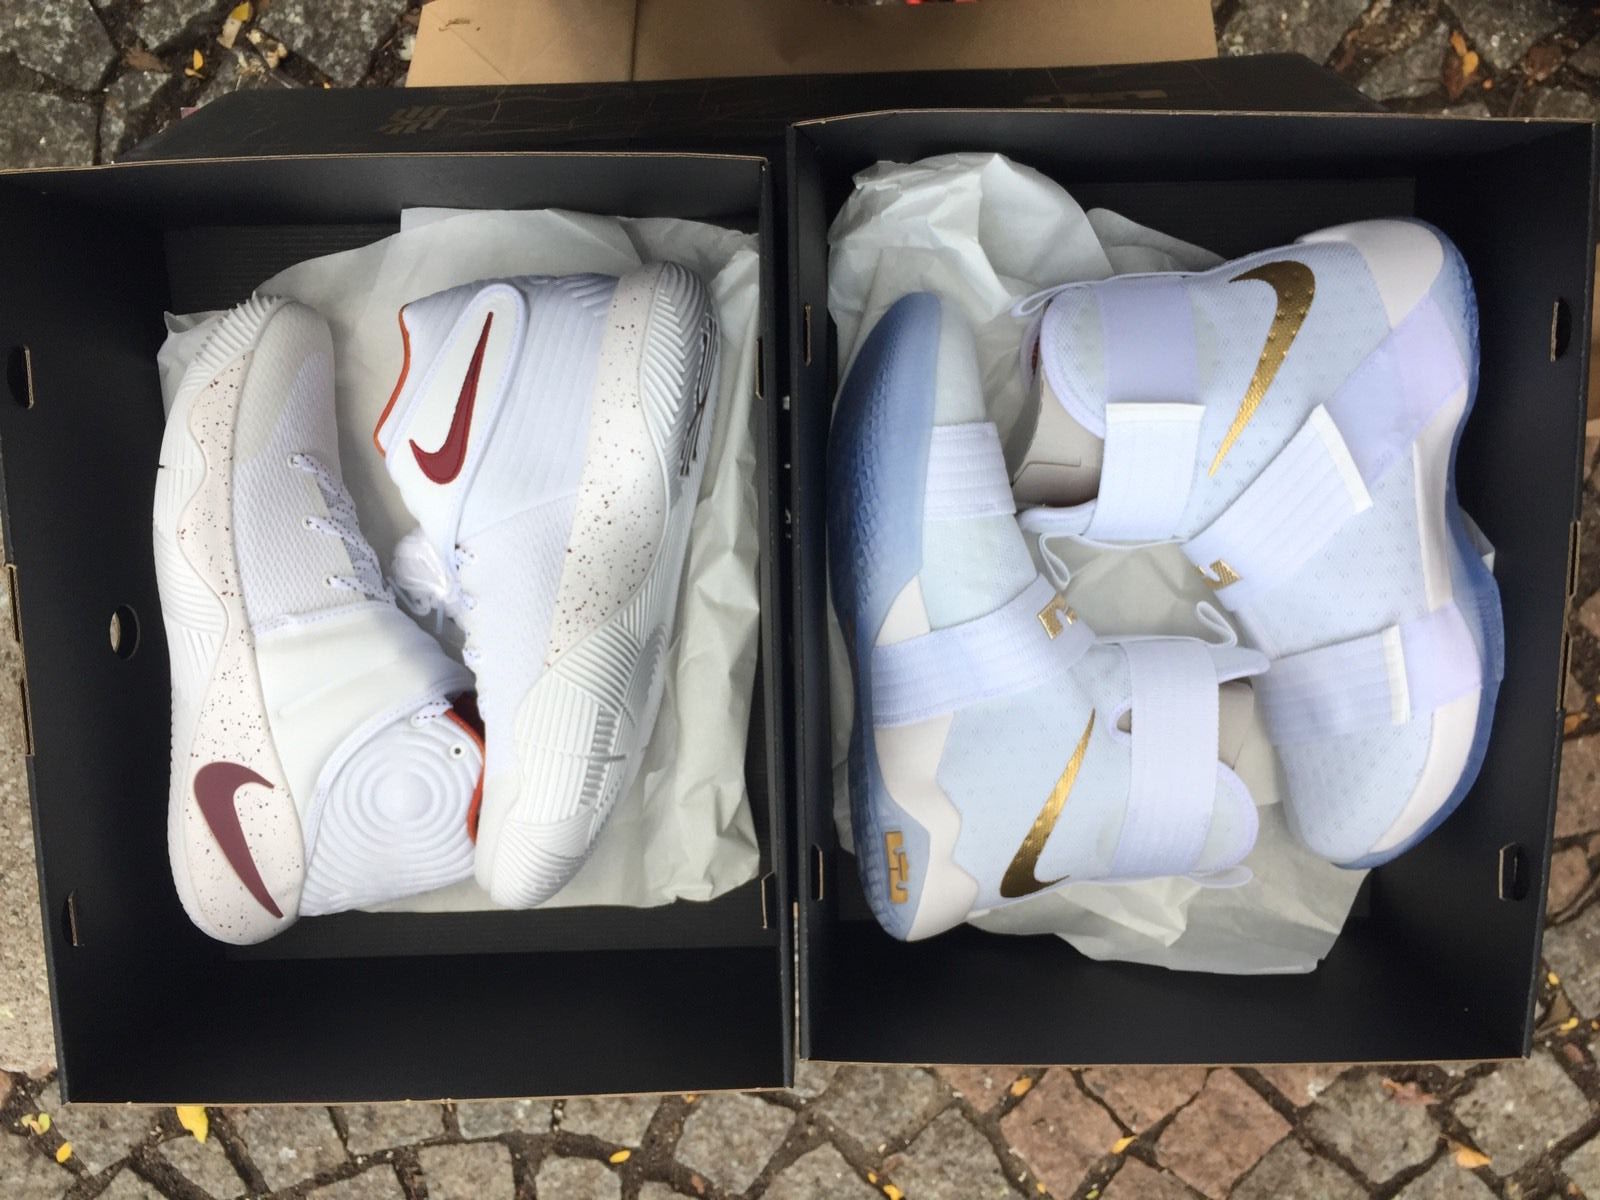 Nike LeBron Kyrie Champ Pack Game 6 Unbroken